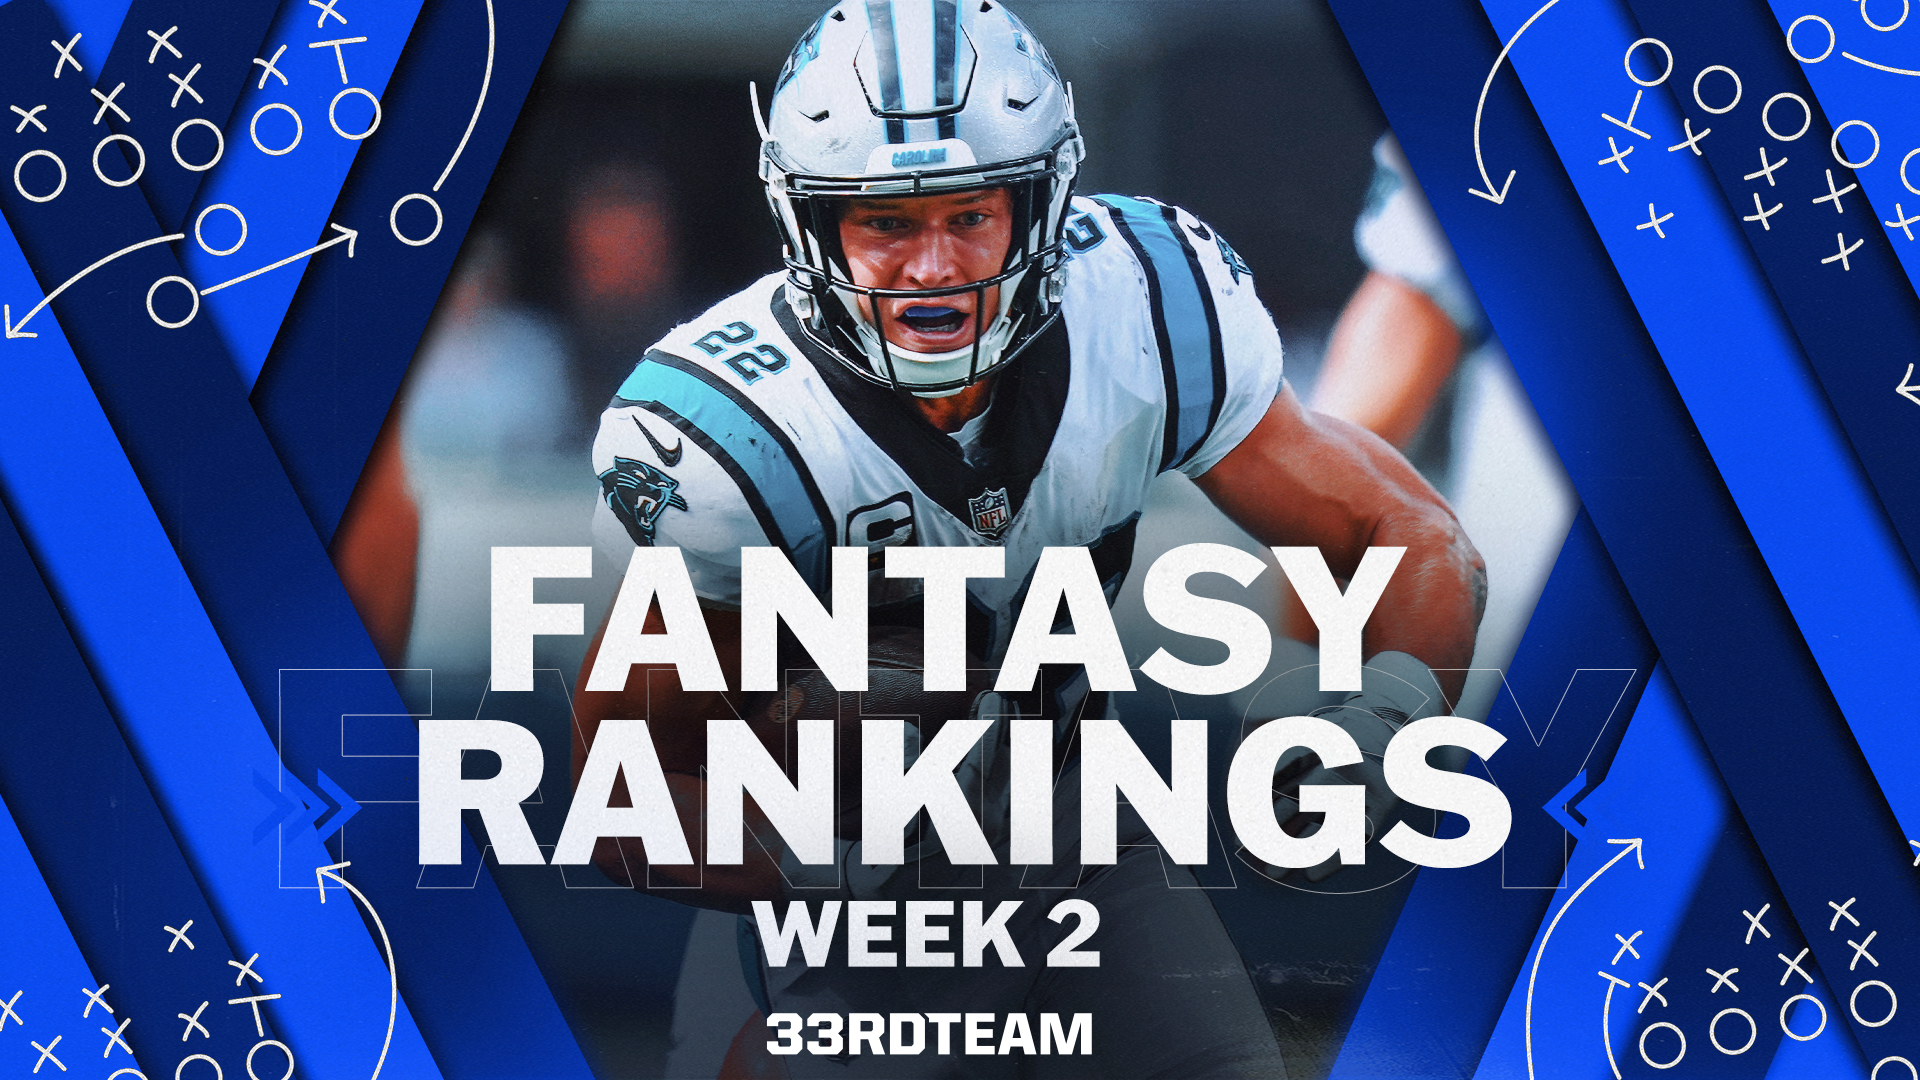 Fantasy Rankings, Page 3 of 4